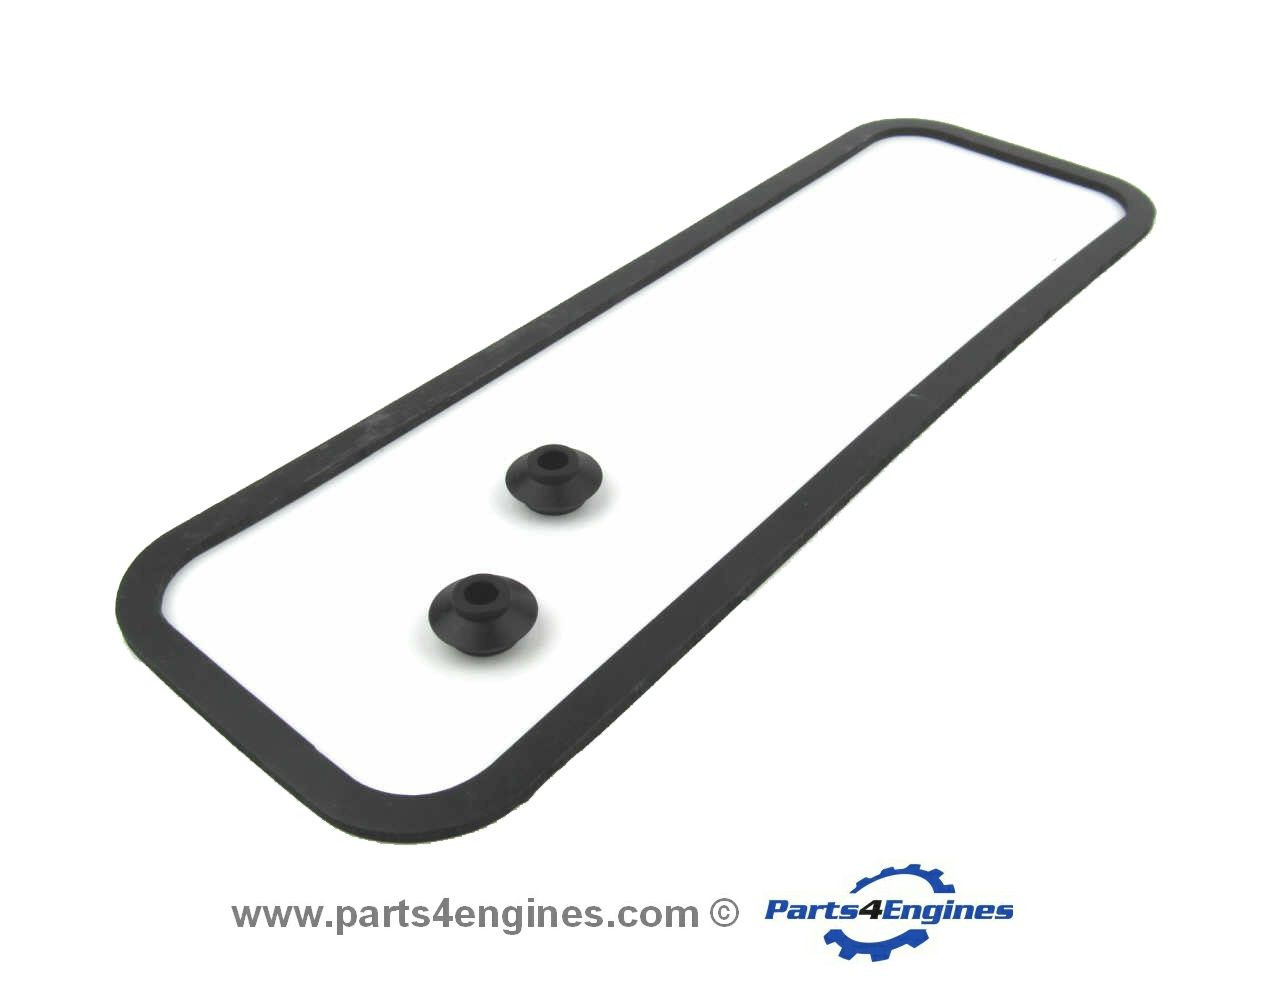 Perkins 4.108 Nitrile Rocker cover gaskets & Upgrade option from parts4engines.com